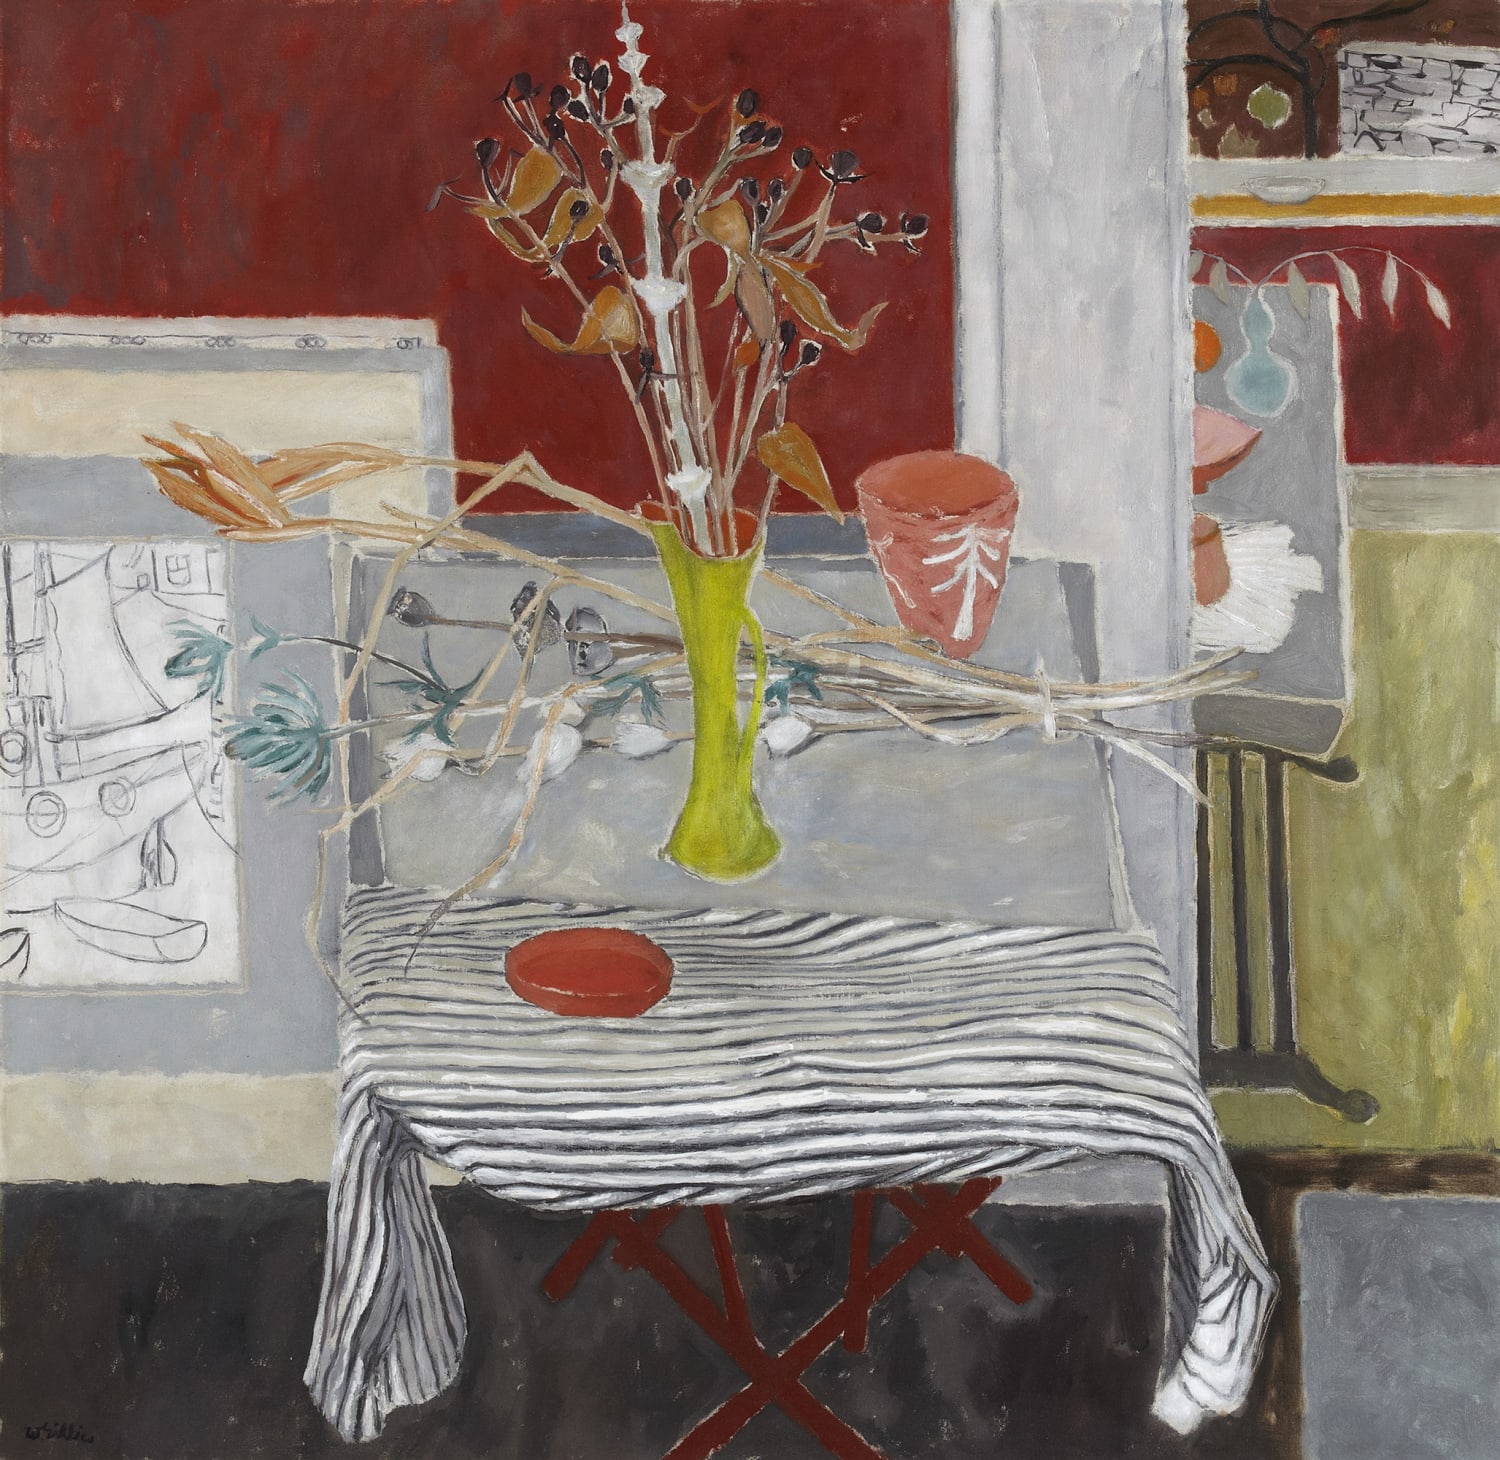 Sir William George Gillies CBE RA RSA (1898-1973), Still Life - Yellow Jug and Striped Cloth  Oil on Canvas, around 1955, 112.0 x 114.7cm  RSA Diploma Collection (Deposited, 1956) 2000.104